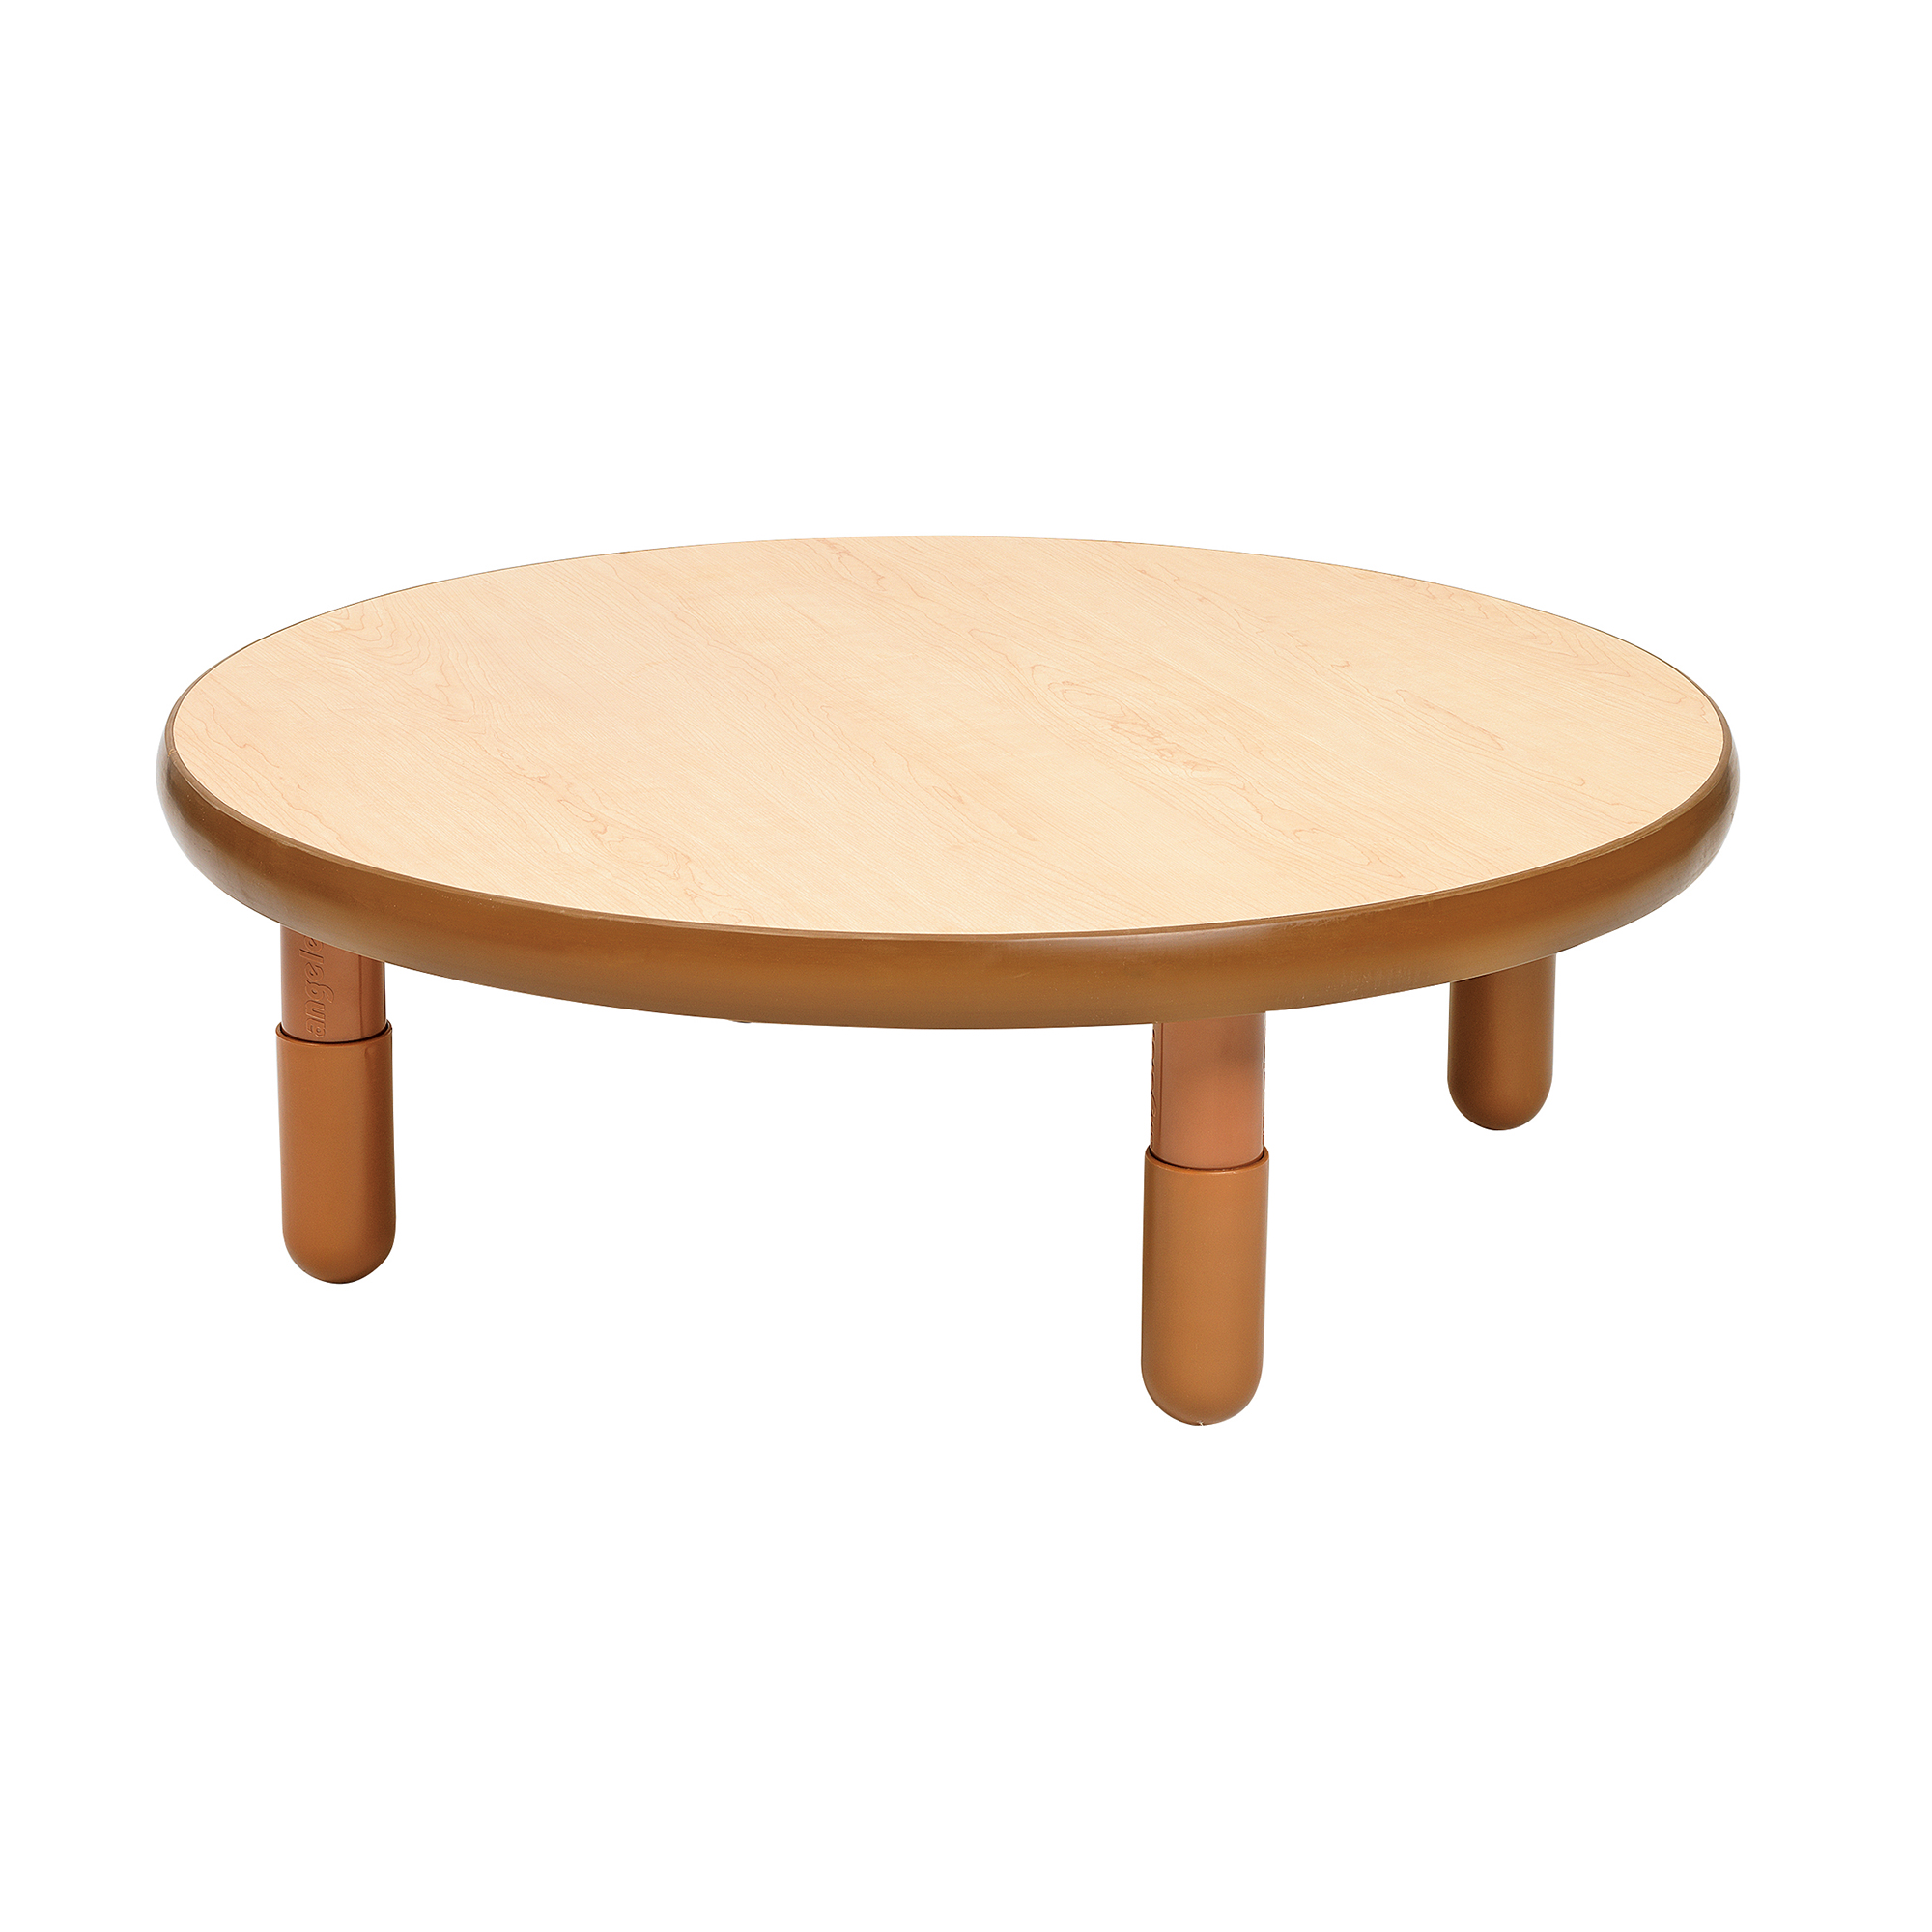 BaseLine® 91,5 cm Diameter Round Table - Natural Wood with 30,5 cm  Legs